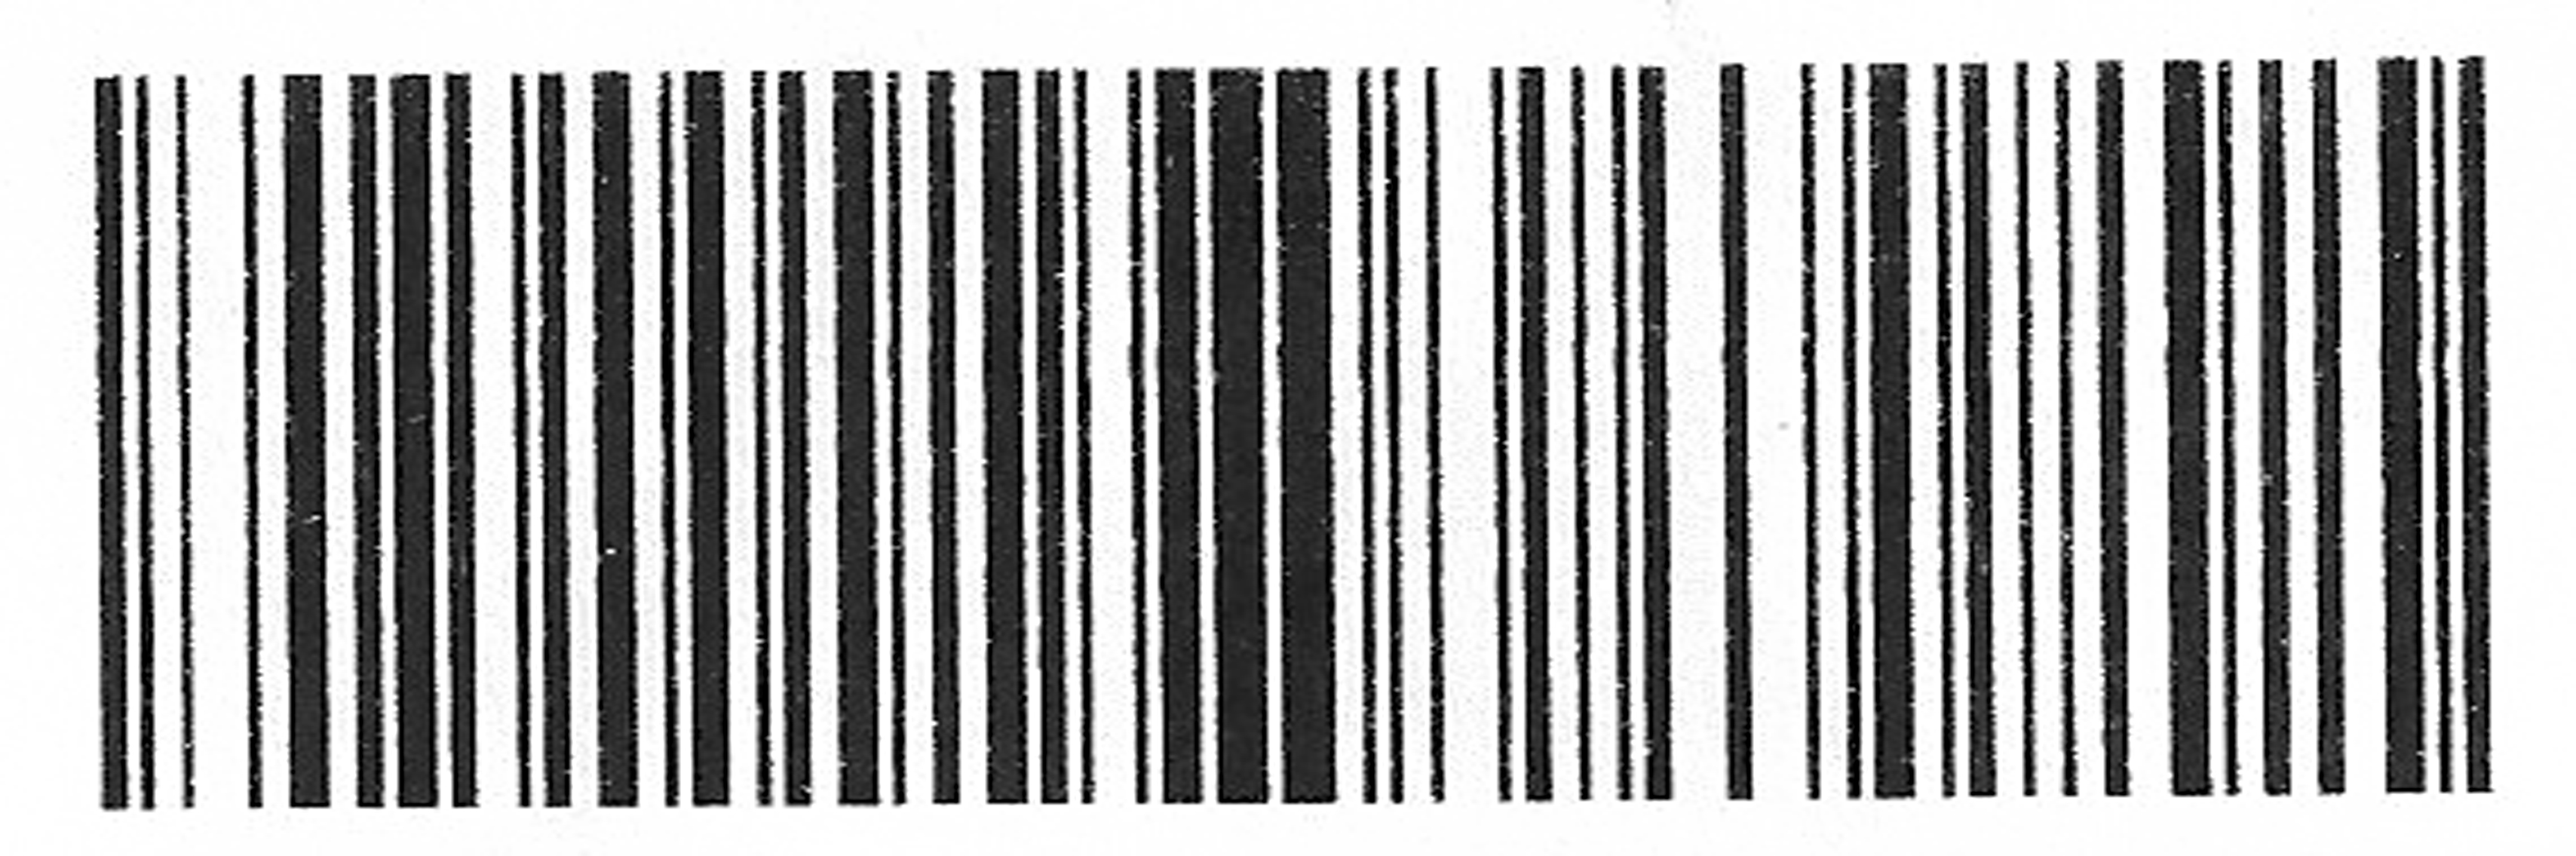 white barcode clipart free